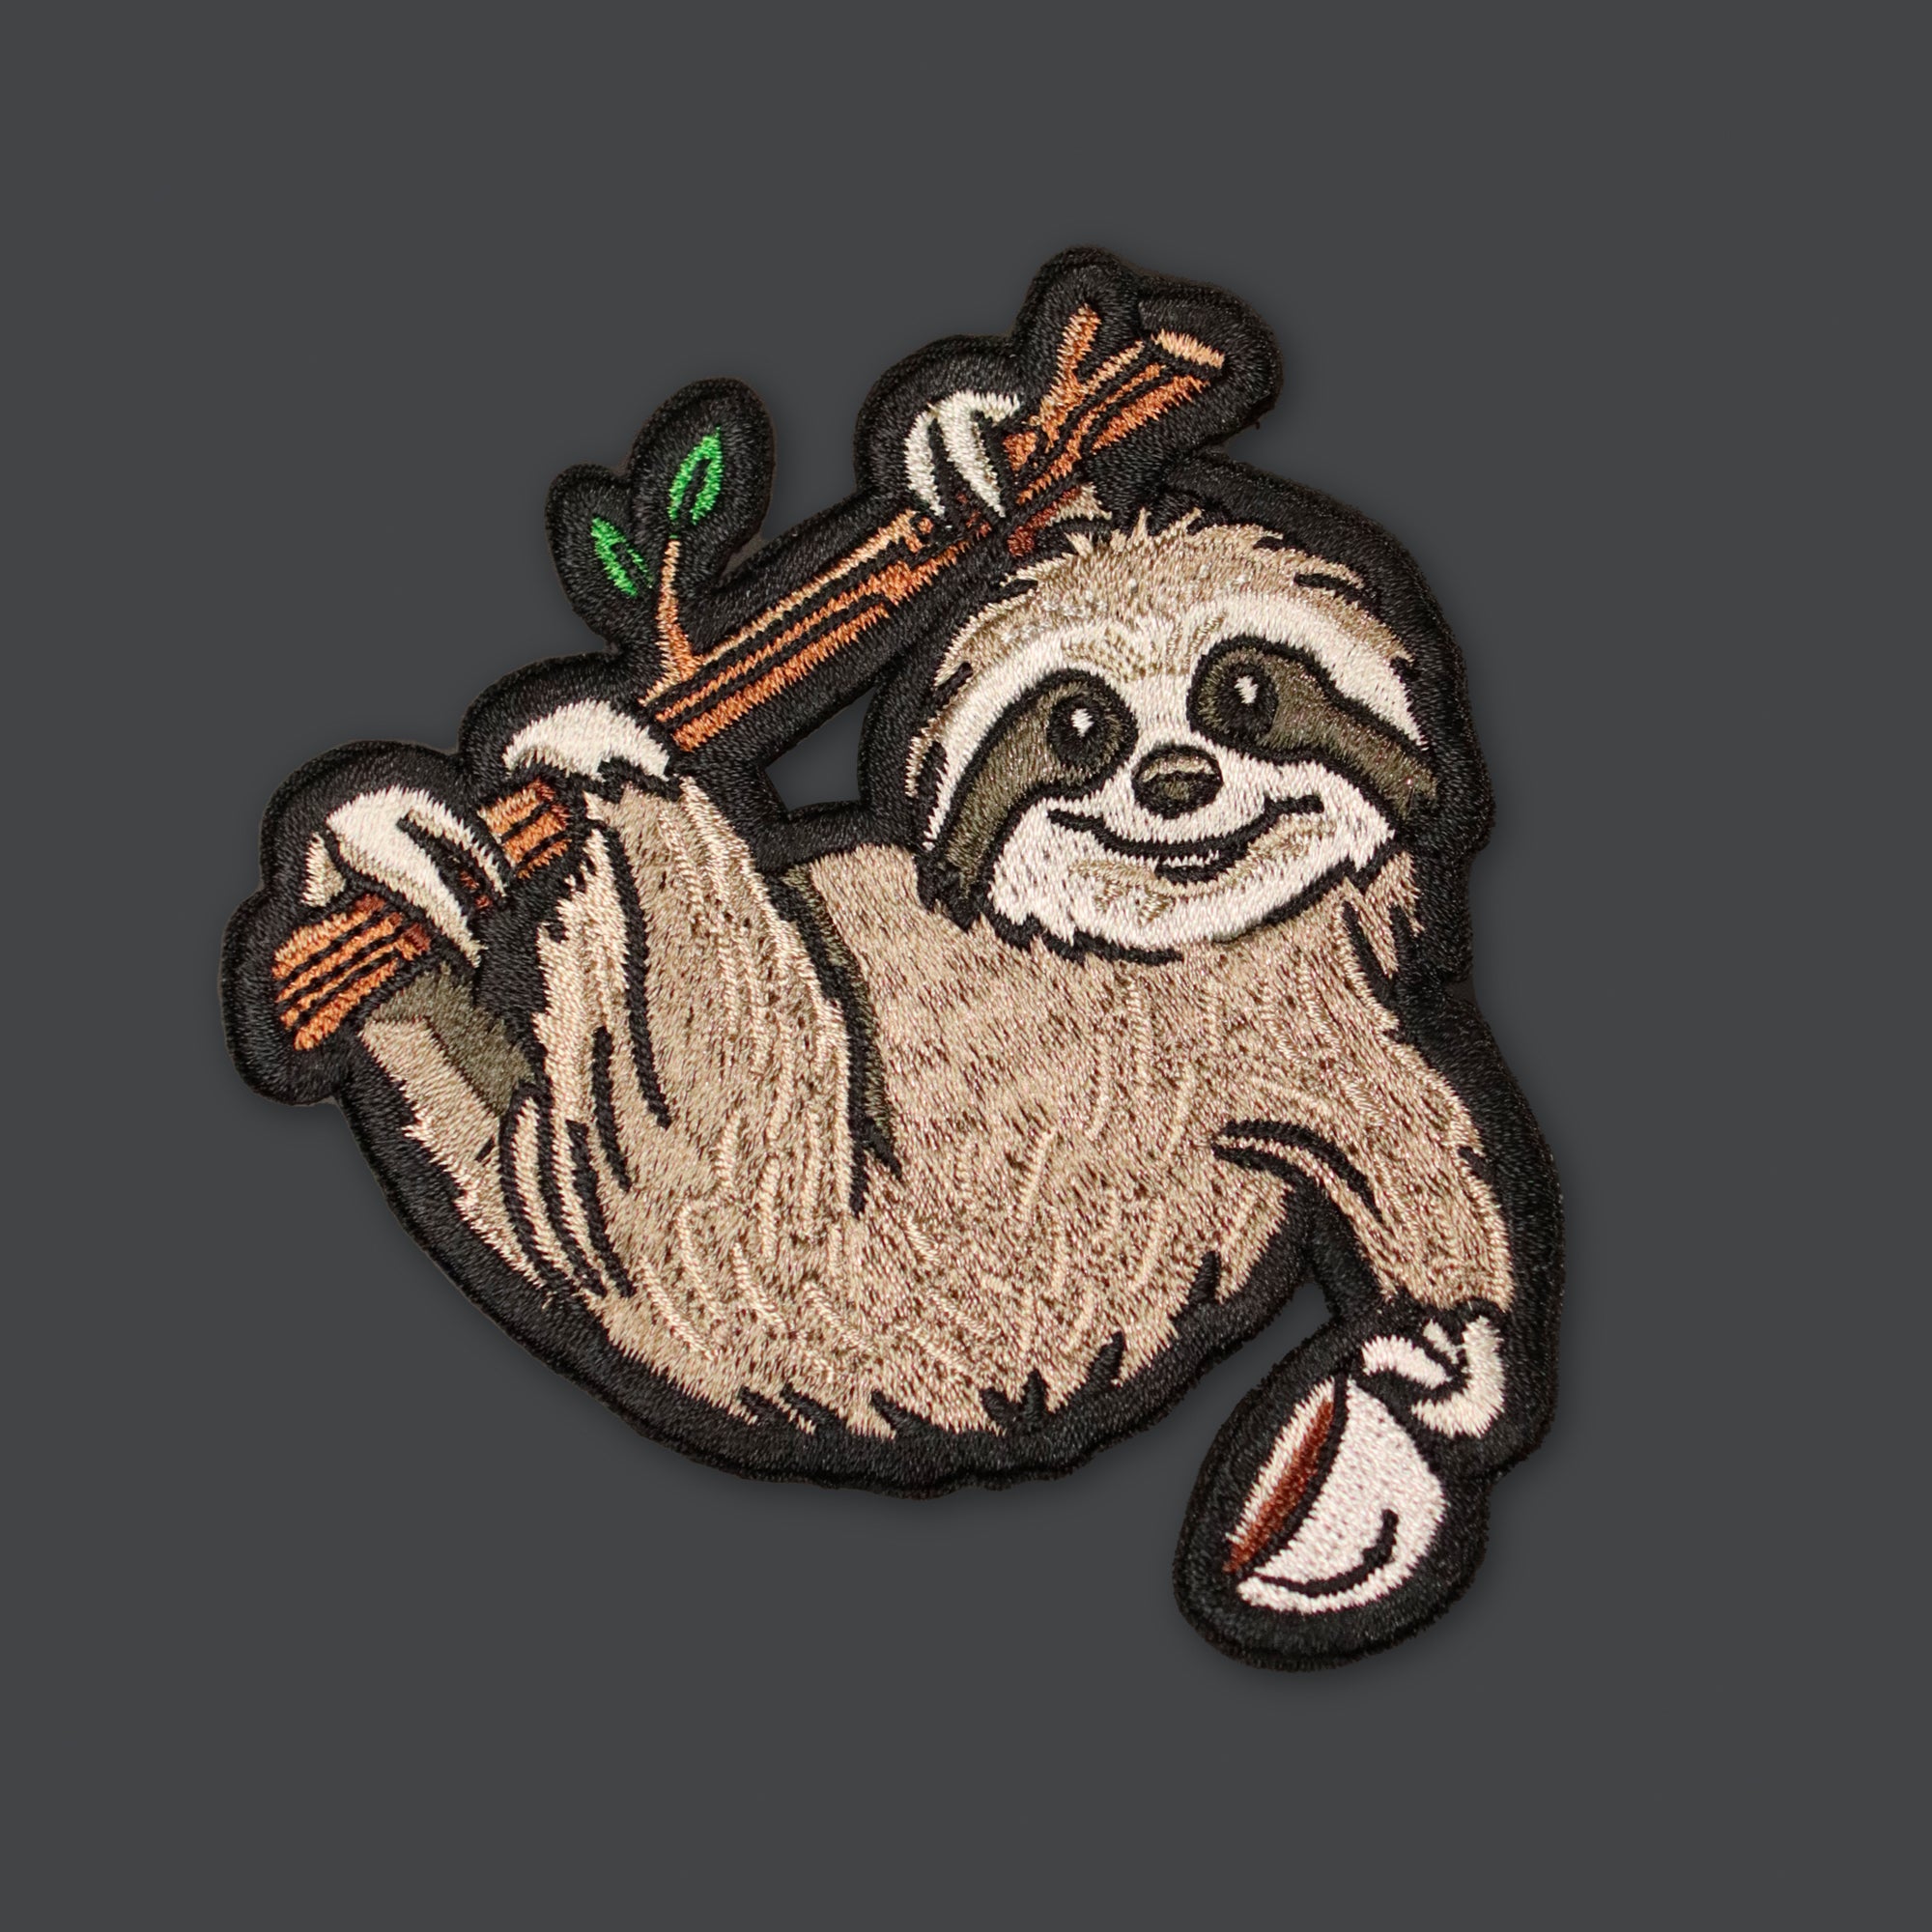 Peeking Sloth Multi-Color Embroidered Iron-On Patch Applique